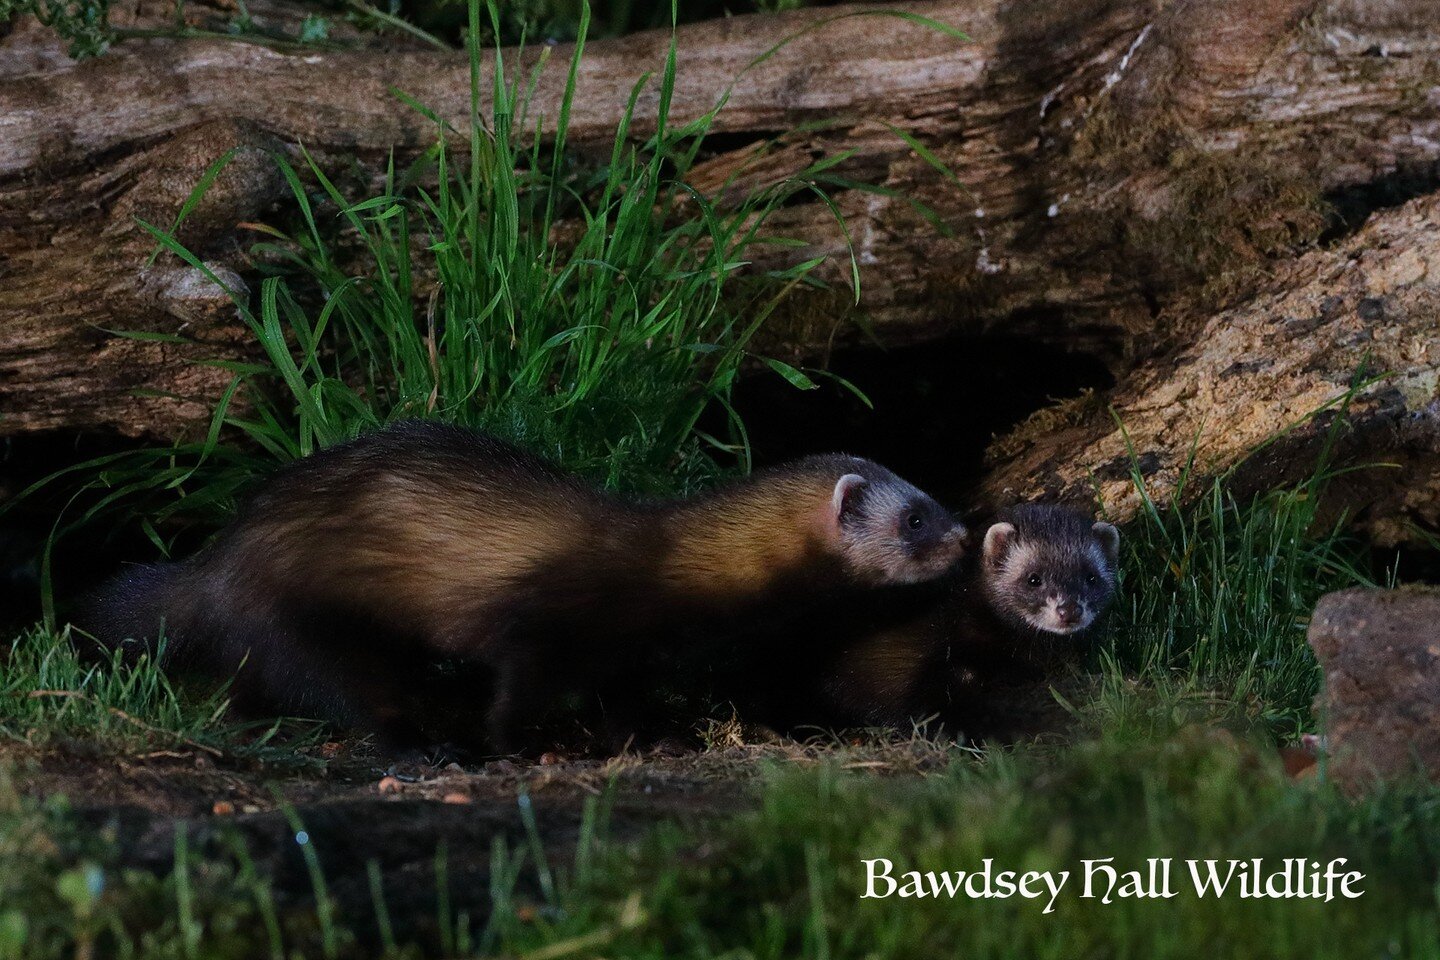 You can now photograph #Polecat kits Bawdsey Hall Wildlife Photography Hides along with #badgers , #owls , #muntjac and #heron.

www.bawdseyhallwildlifephotographyhides.co.uk 

.
.
.
.

#bawdseyhallwildlifephotographyhides
#bawdseyhallwildlifehides #